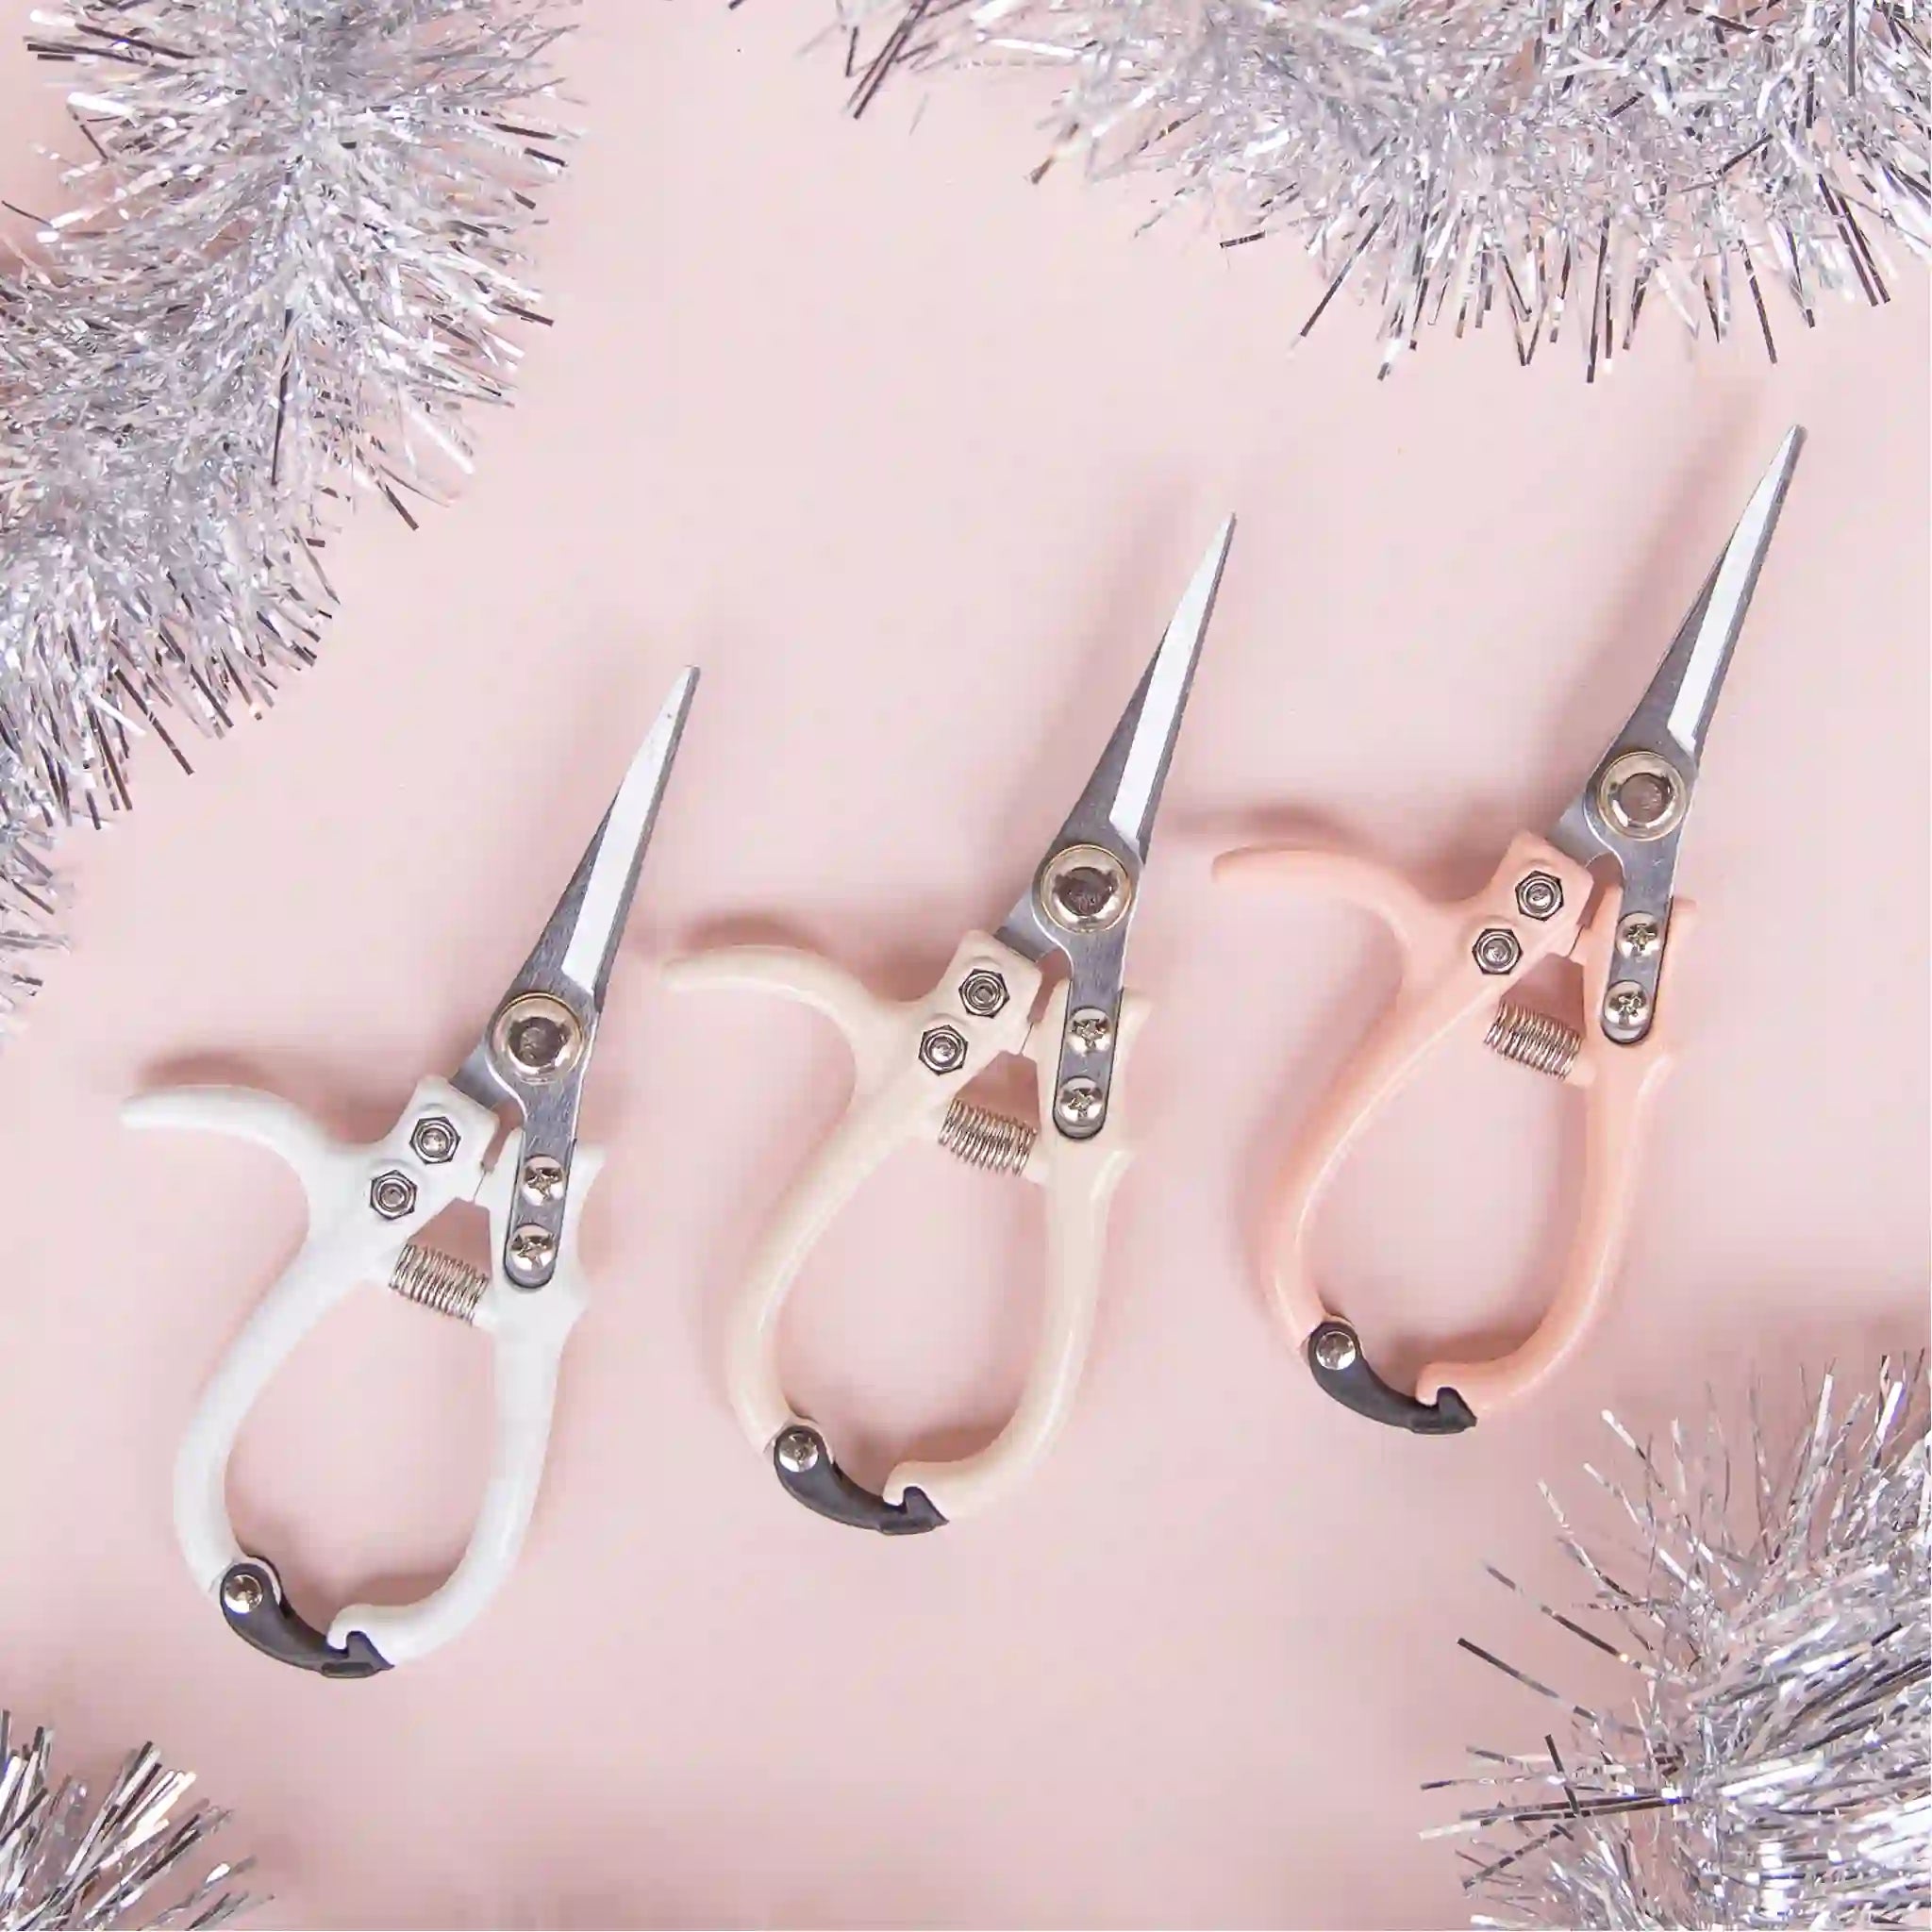 All three color ways of the pruning shears photographed next to each other and staged in the middle of silver tinsel. There is a white, a light pink and a neutral tan.